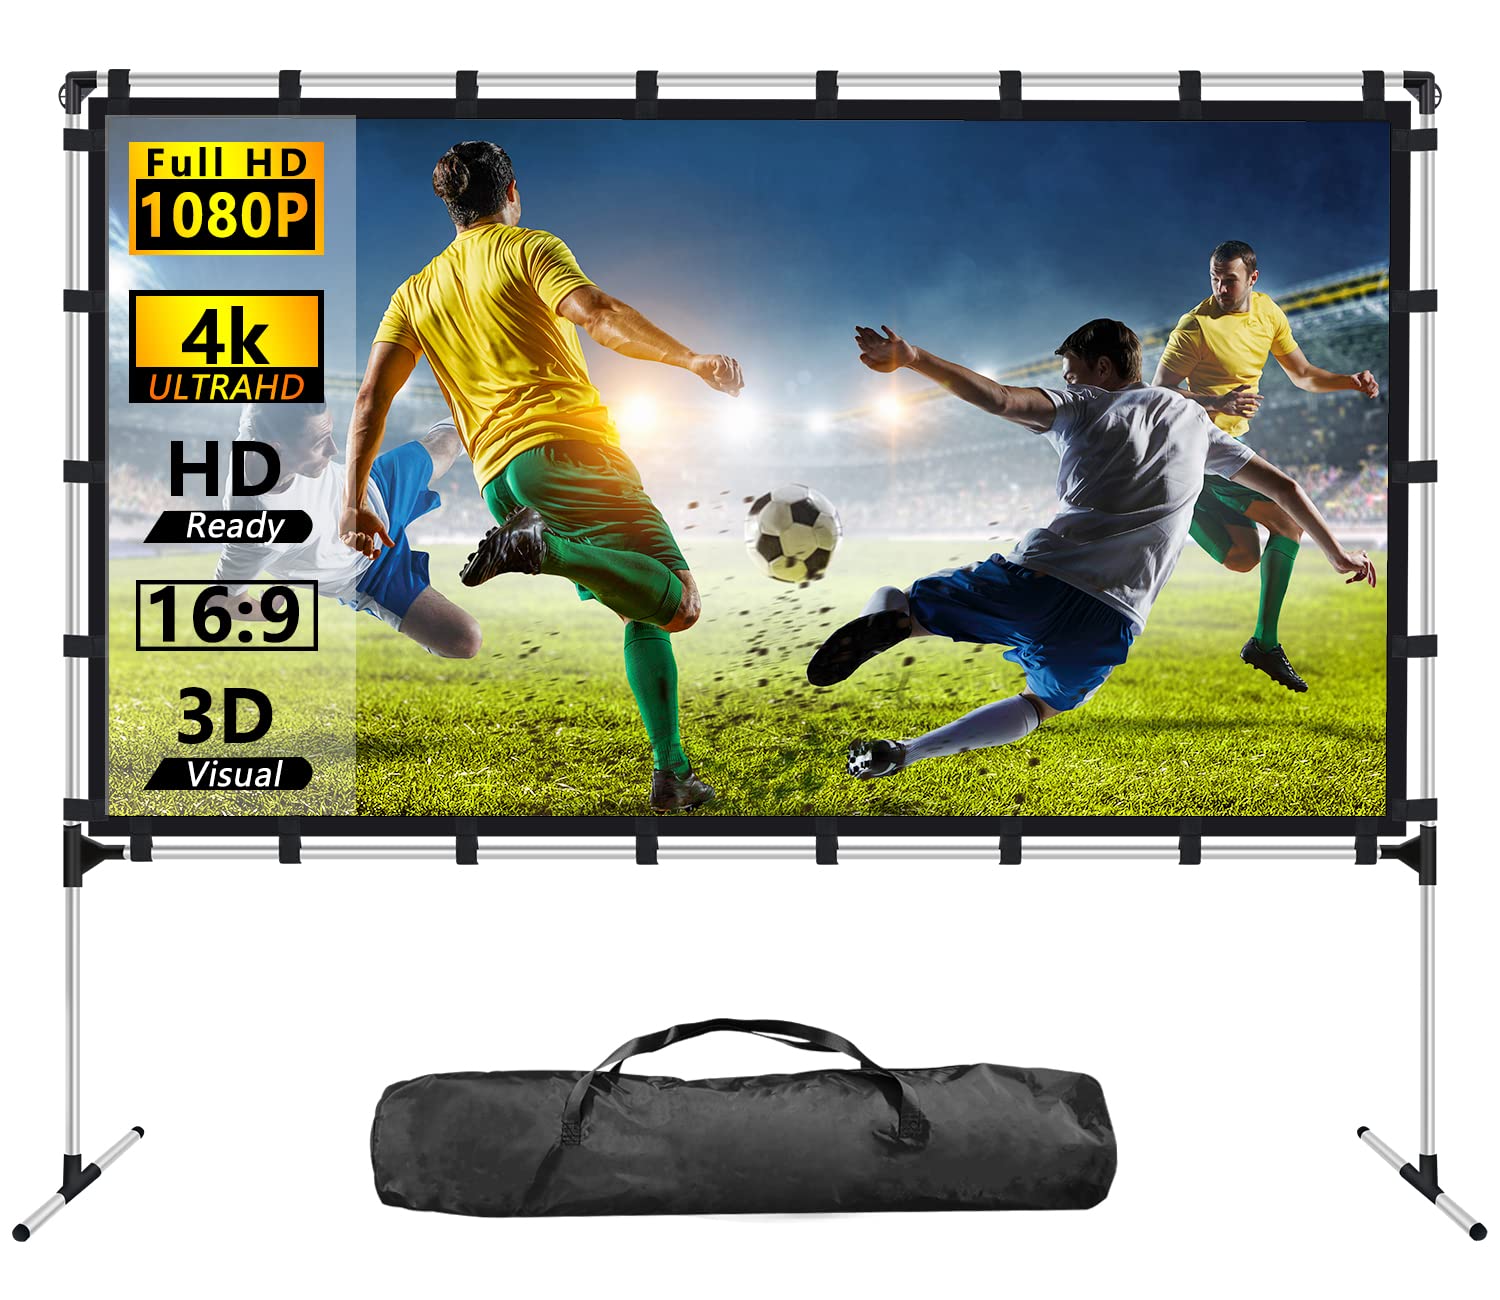 AZXRHWYGS Projector Screen with Stand 120 inch Outdoor Indoor Projector Screen 16:9 4K HD Portable Rear Front Projection Movie Screen with Carry Bag for Home Theater Backyard Movie Night